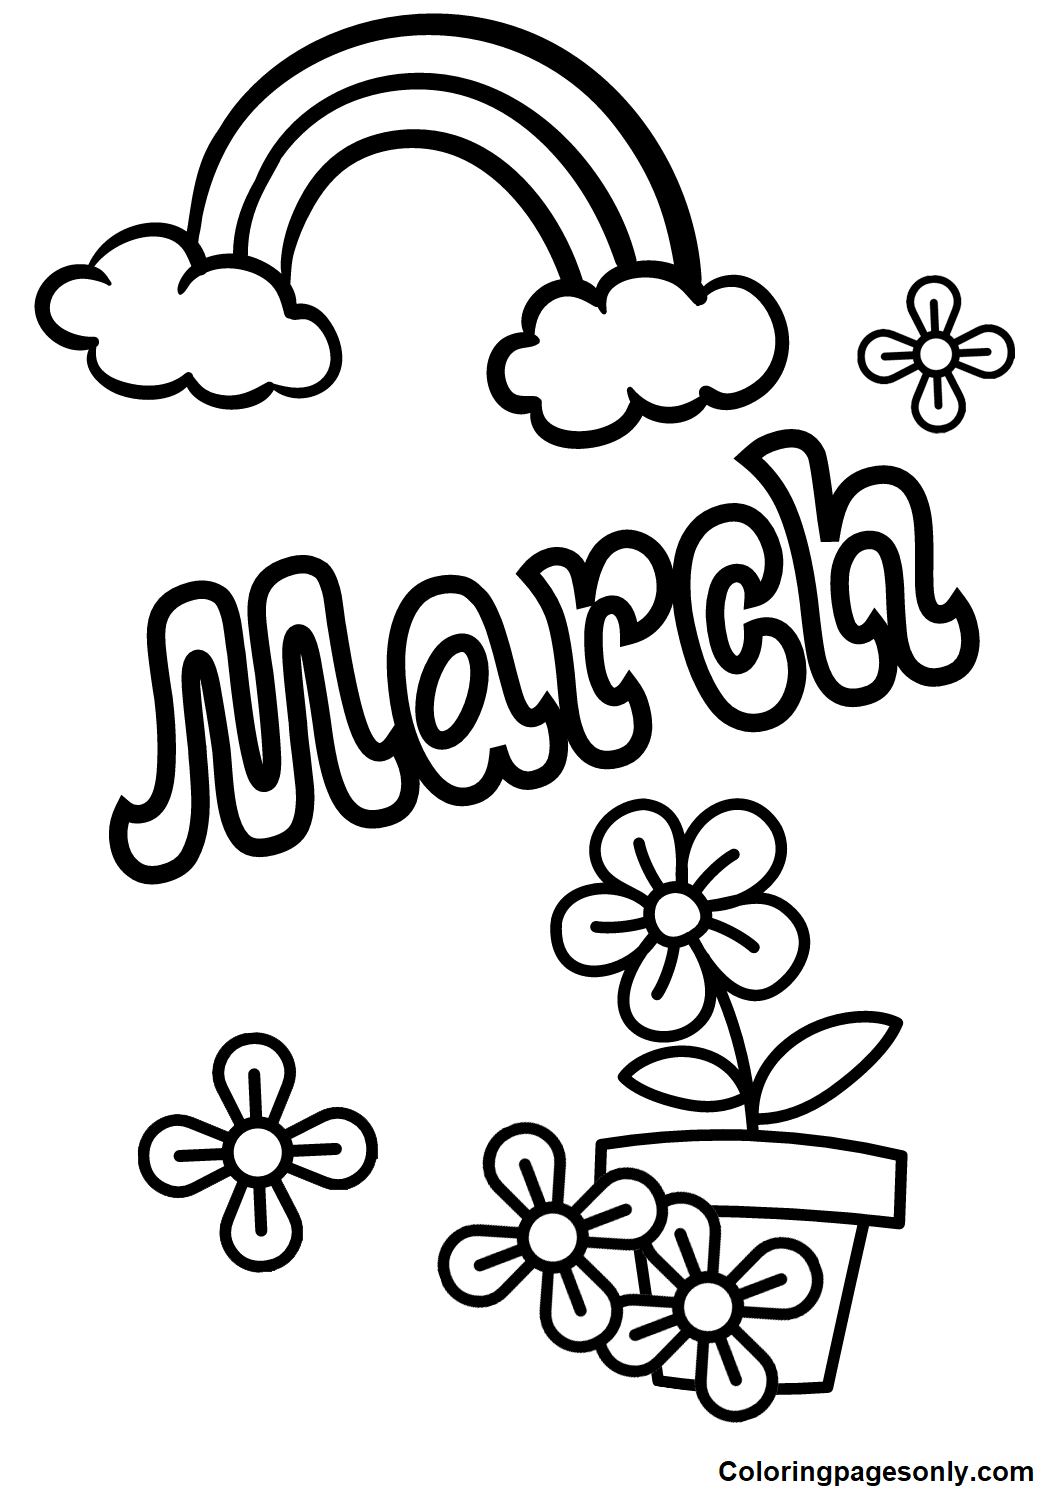 March Coloring Pages Free Printable 26